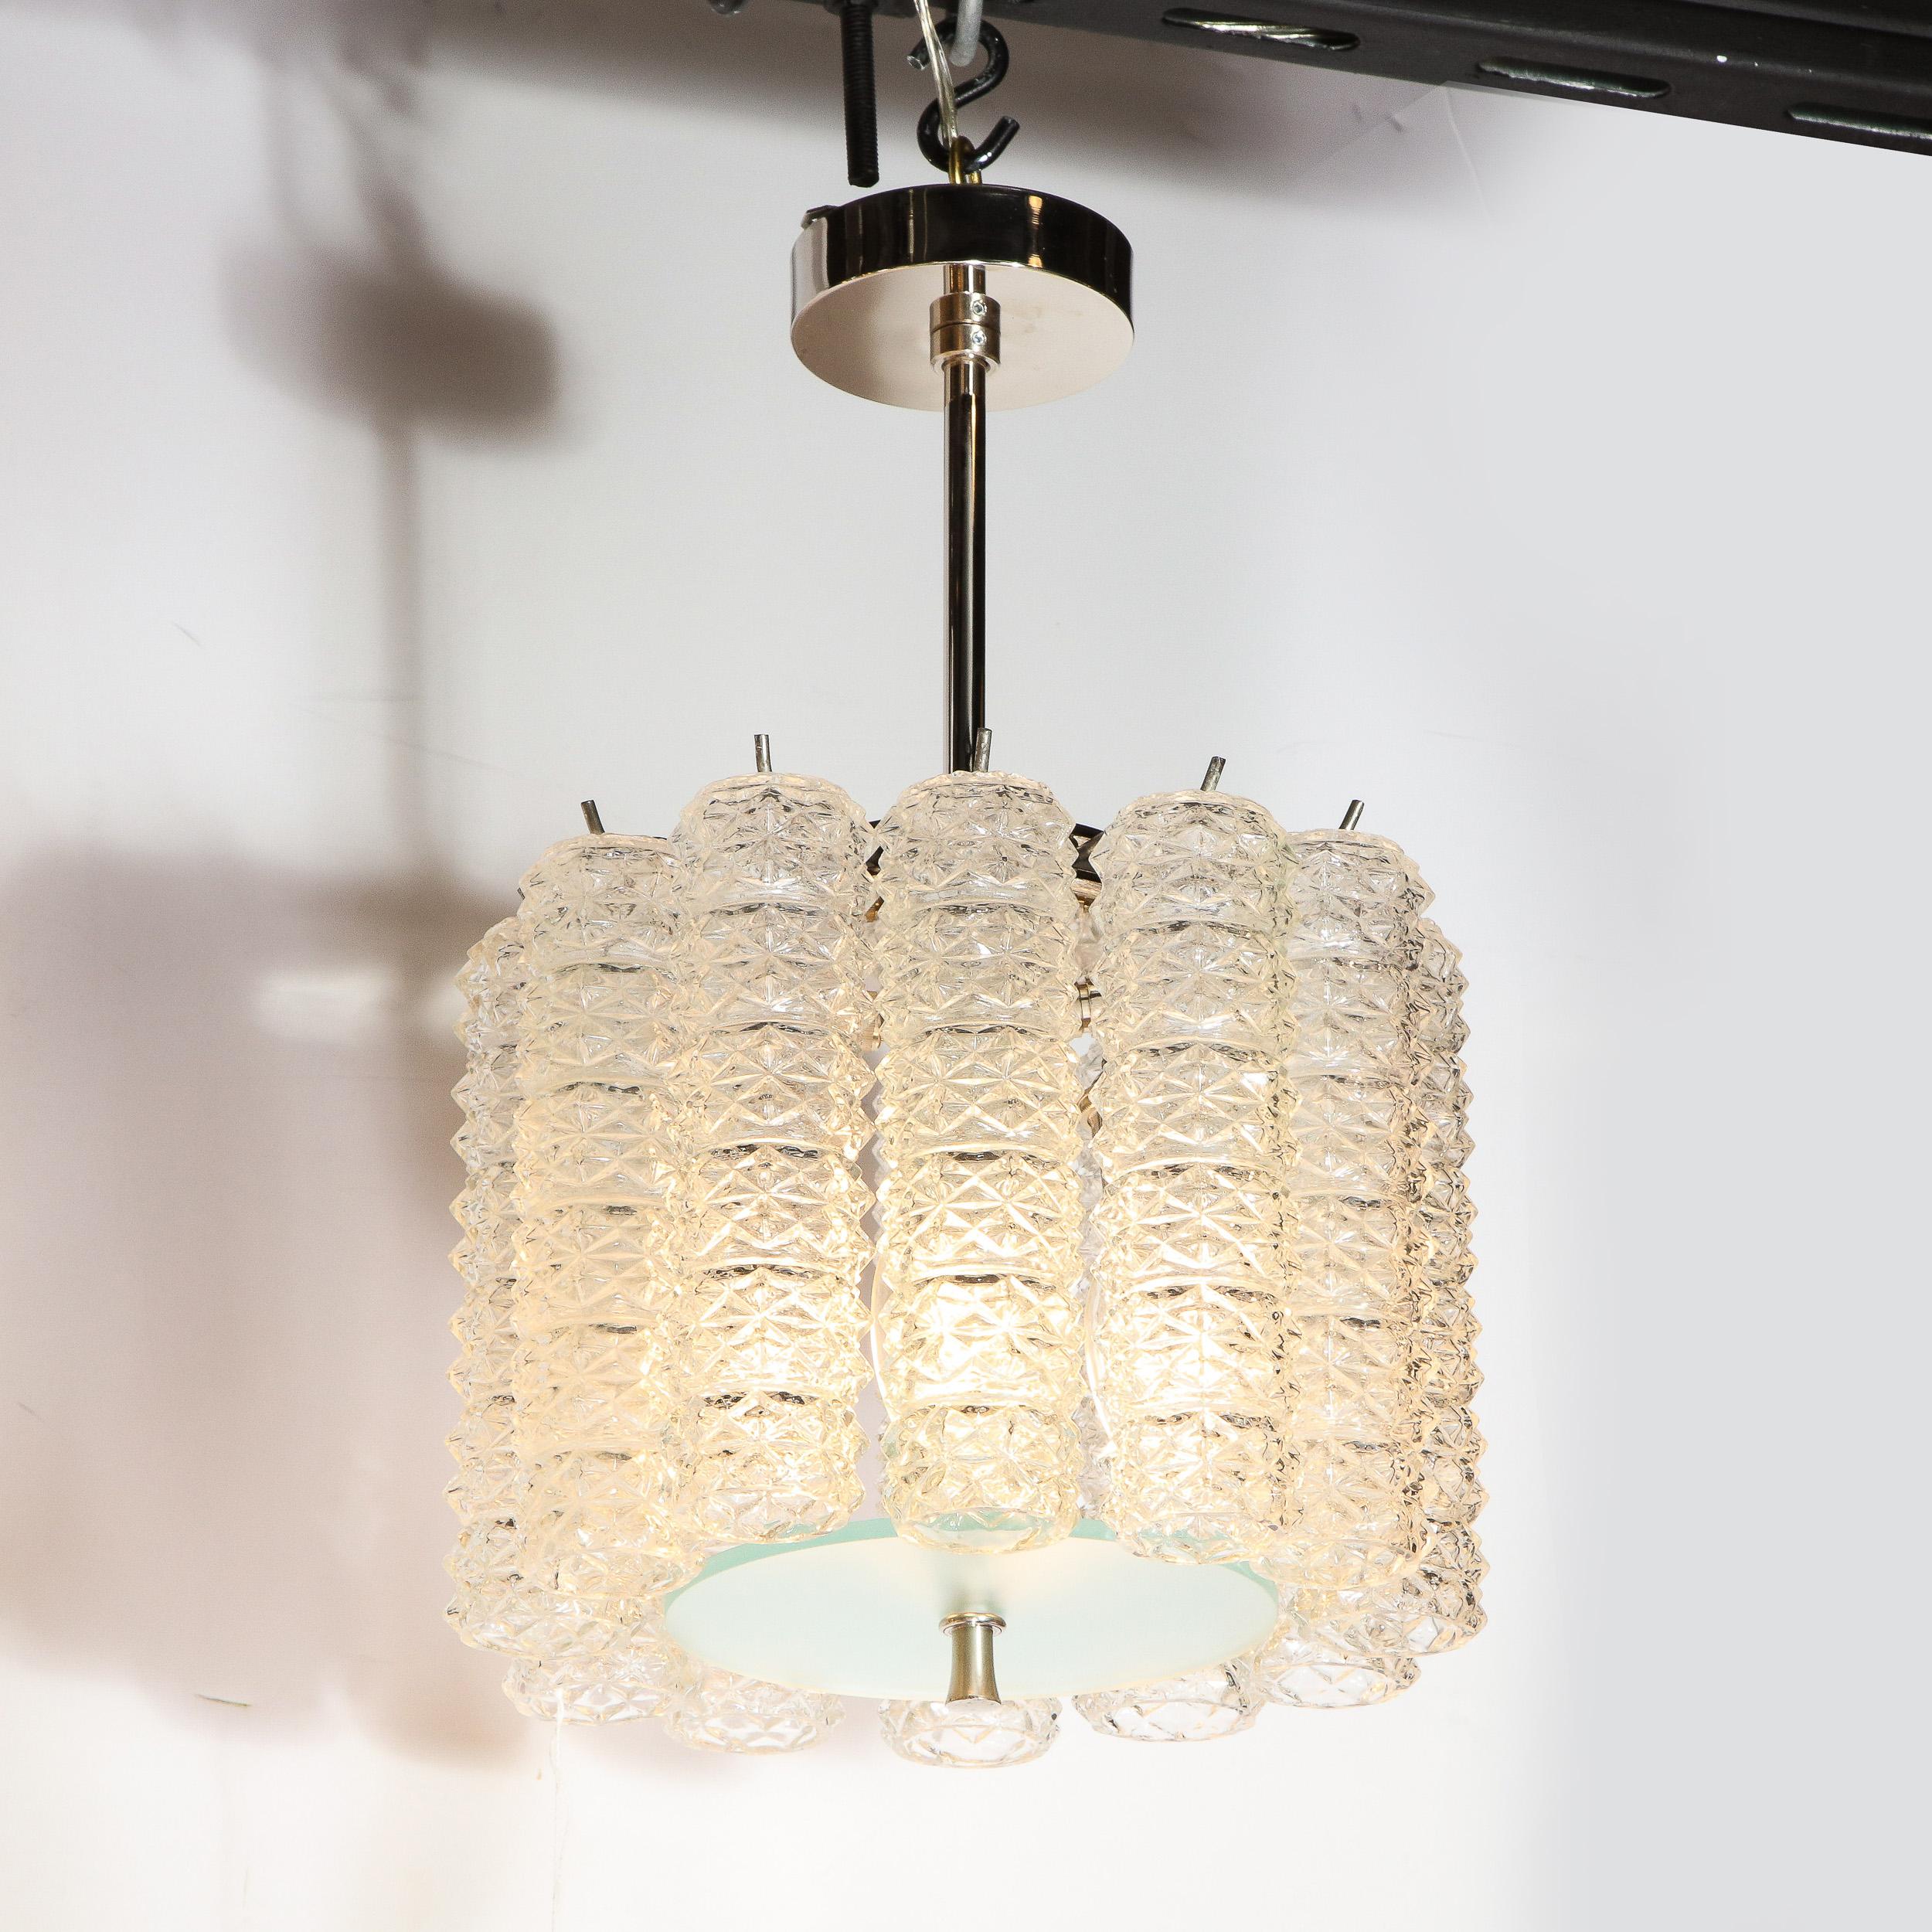 Late 20th Century Mid-Century Modern Hand Blown Translucent and Frosted Murano Glass Chandelier